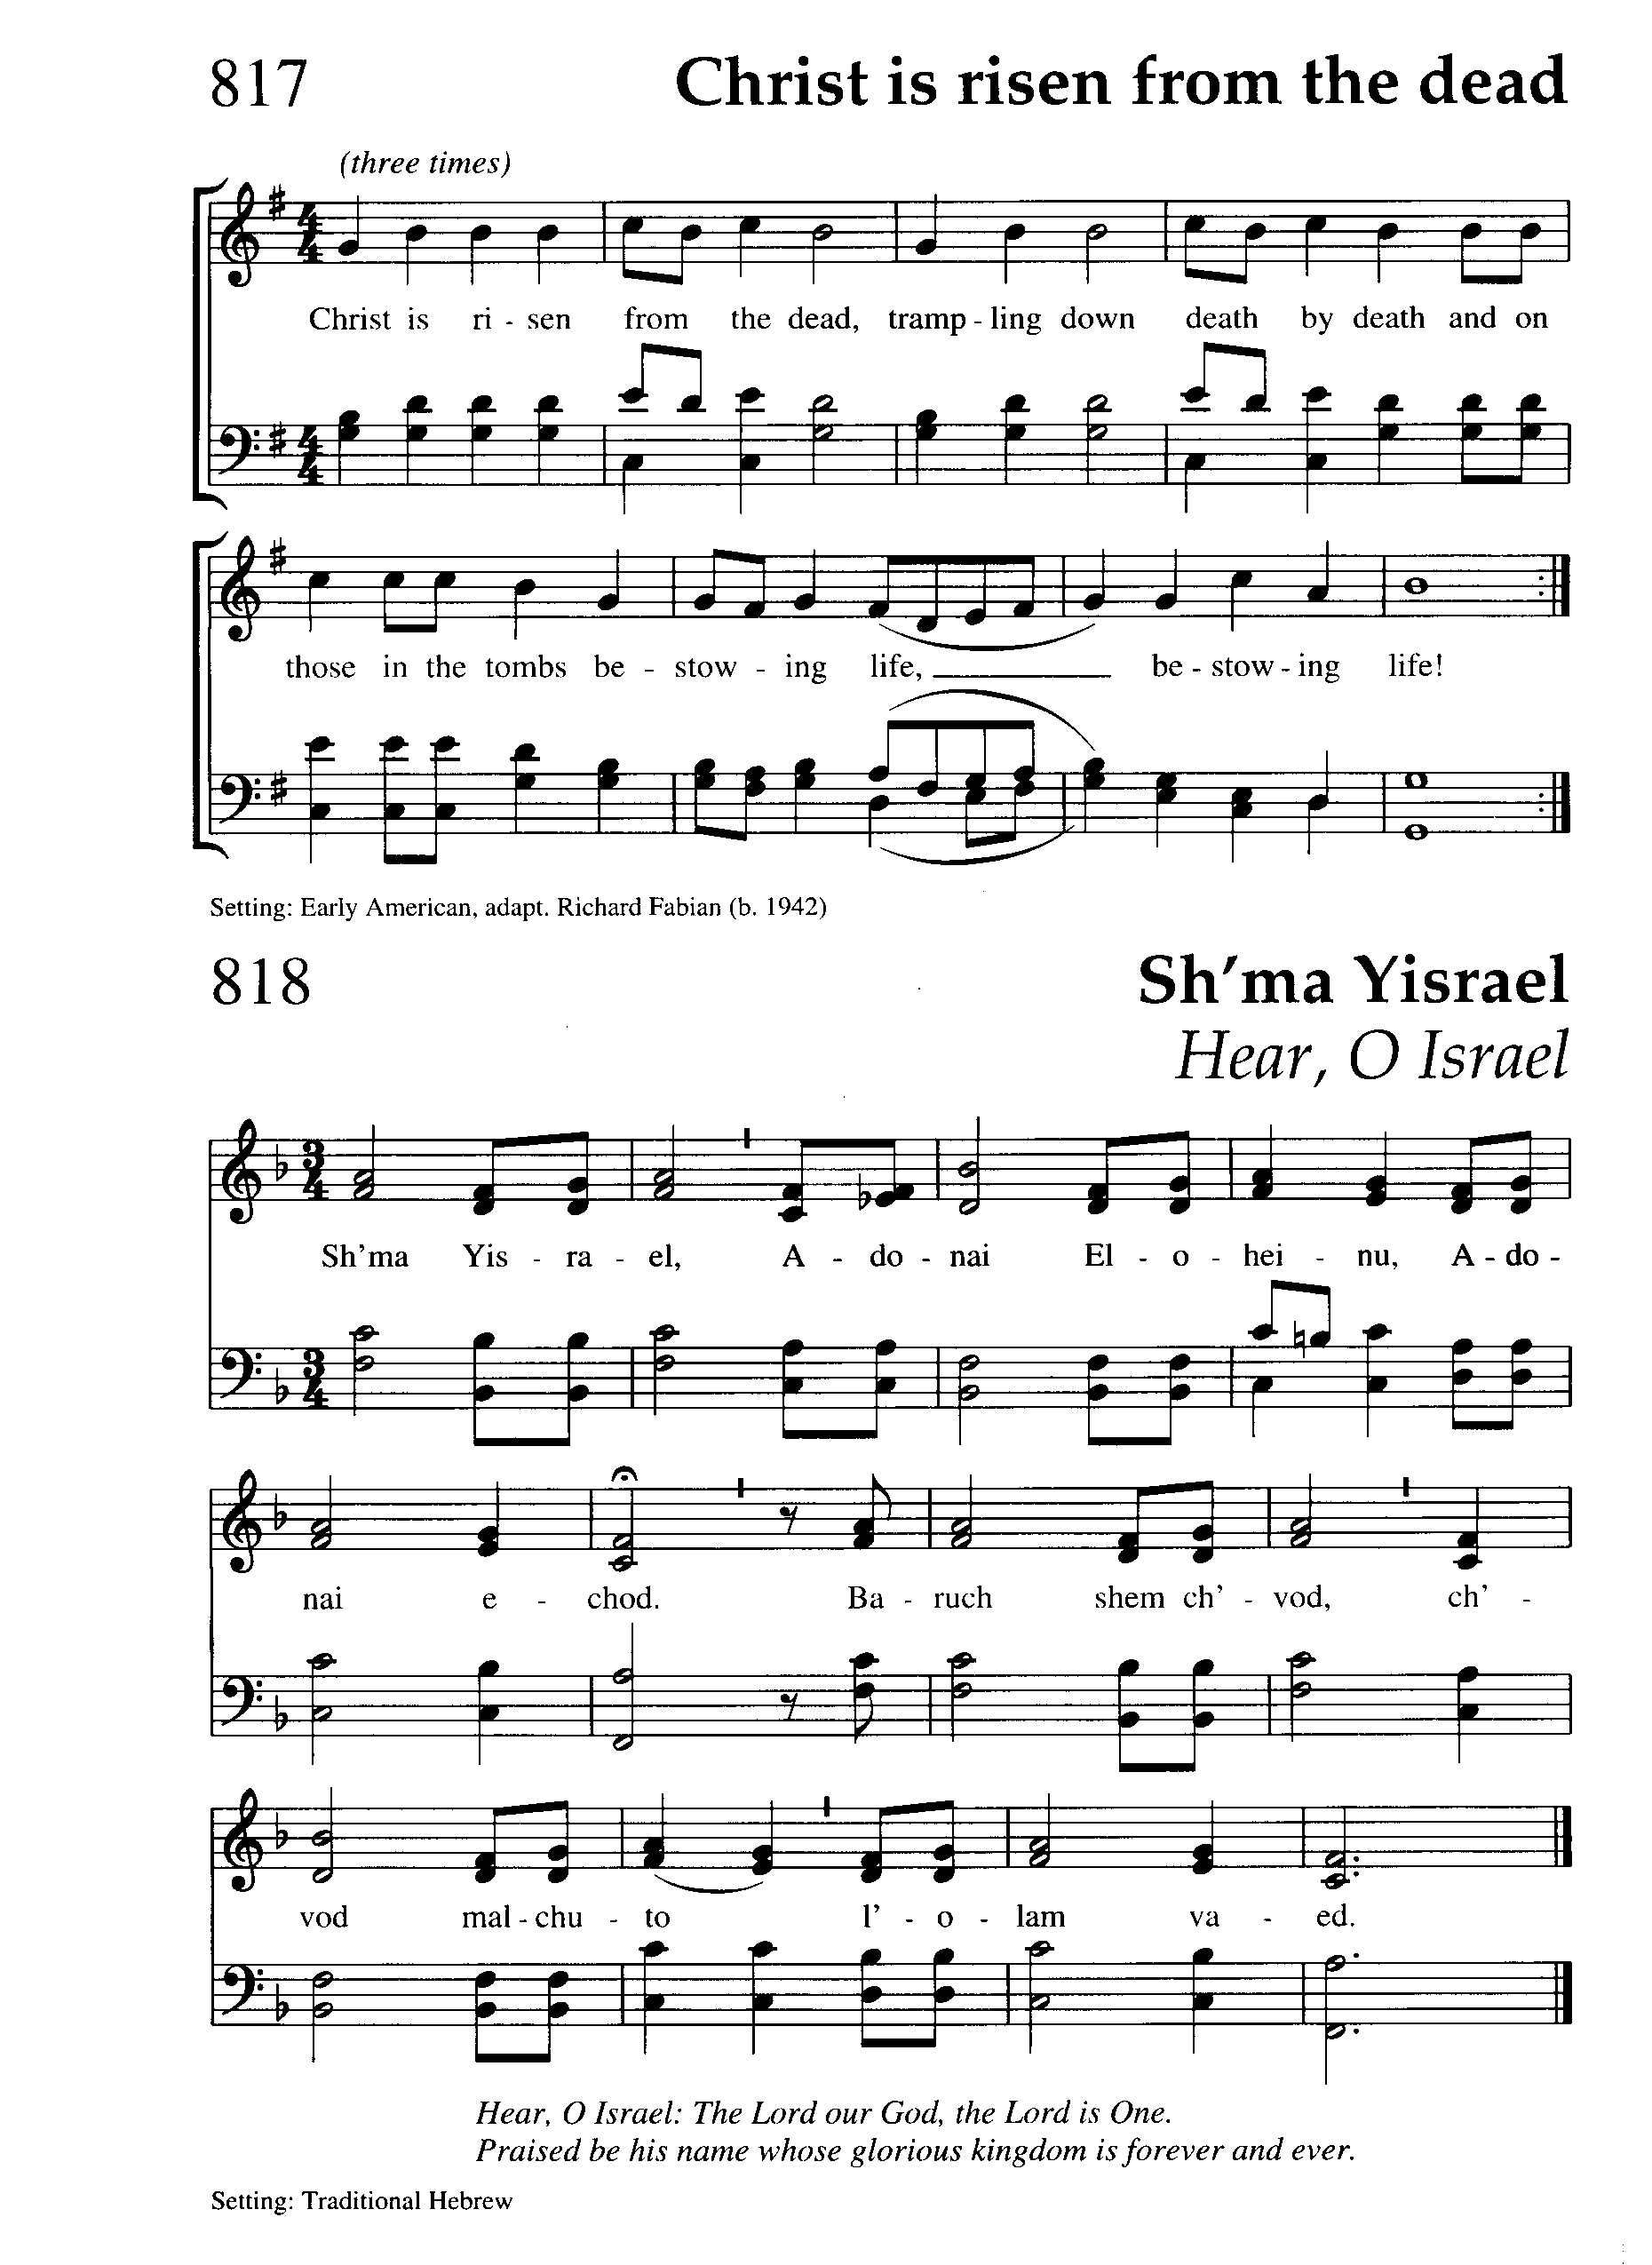 Page Scan from Hymnary.org.